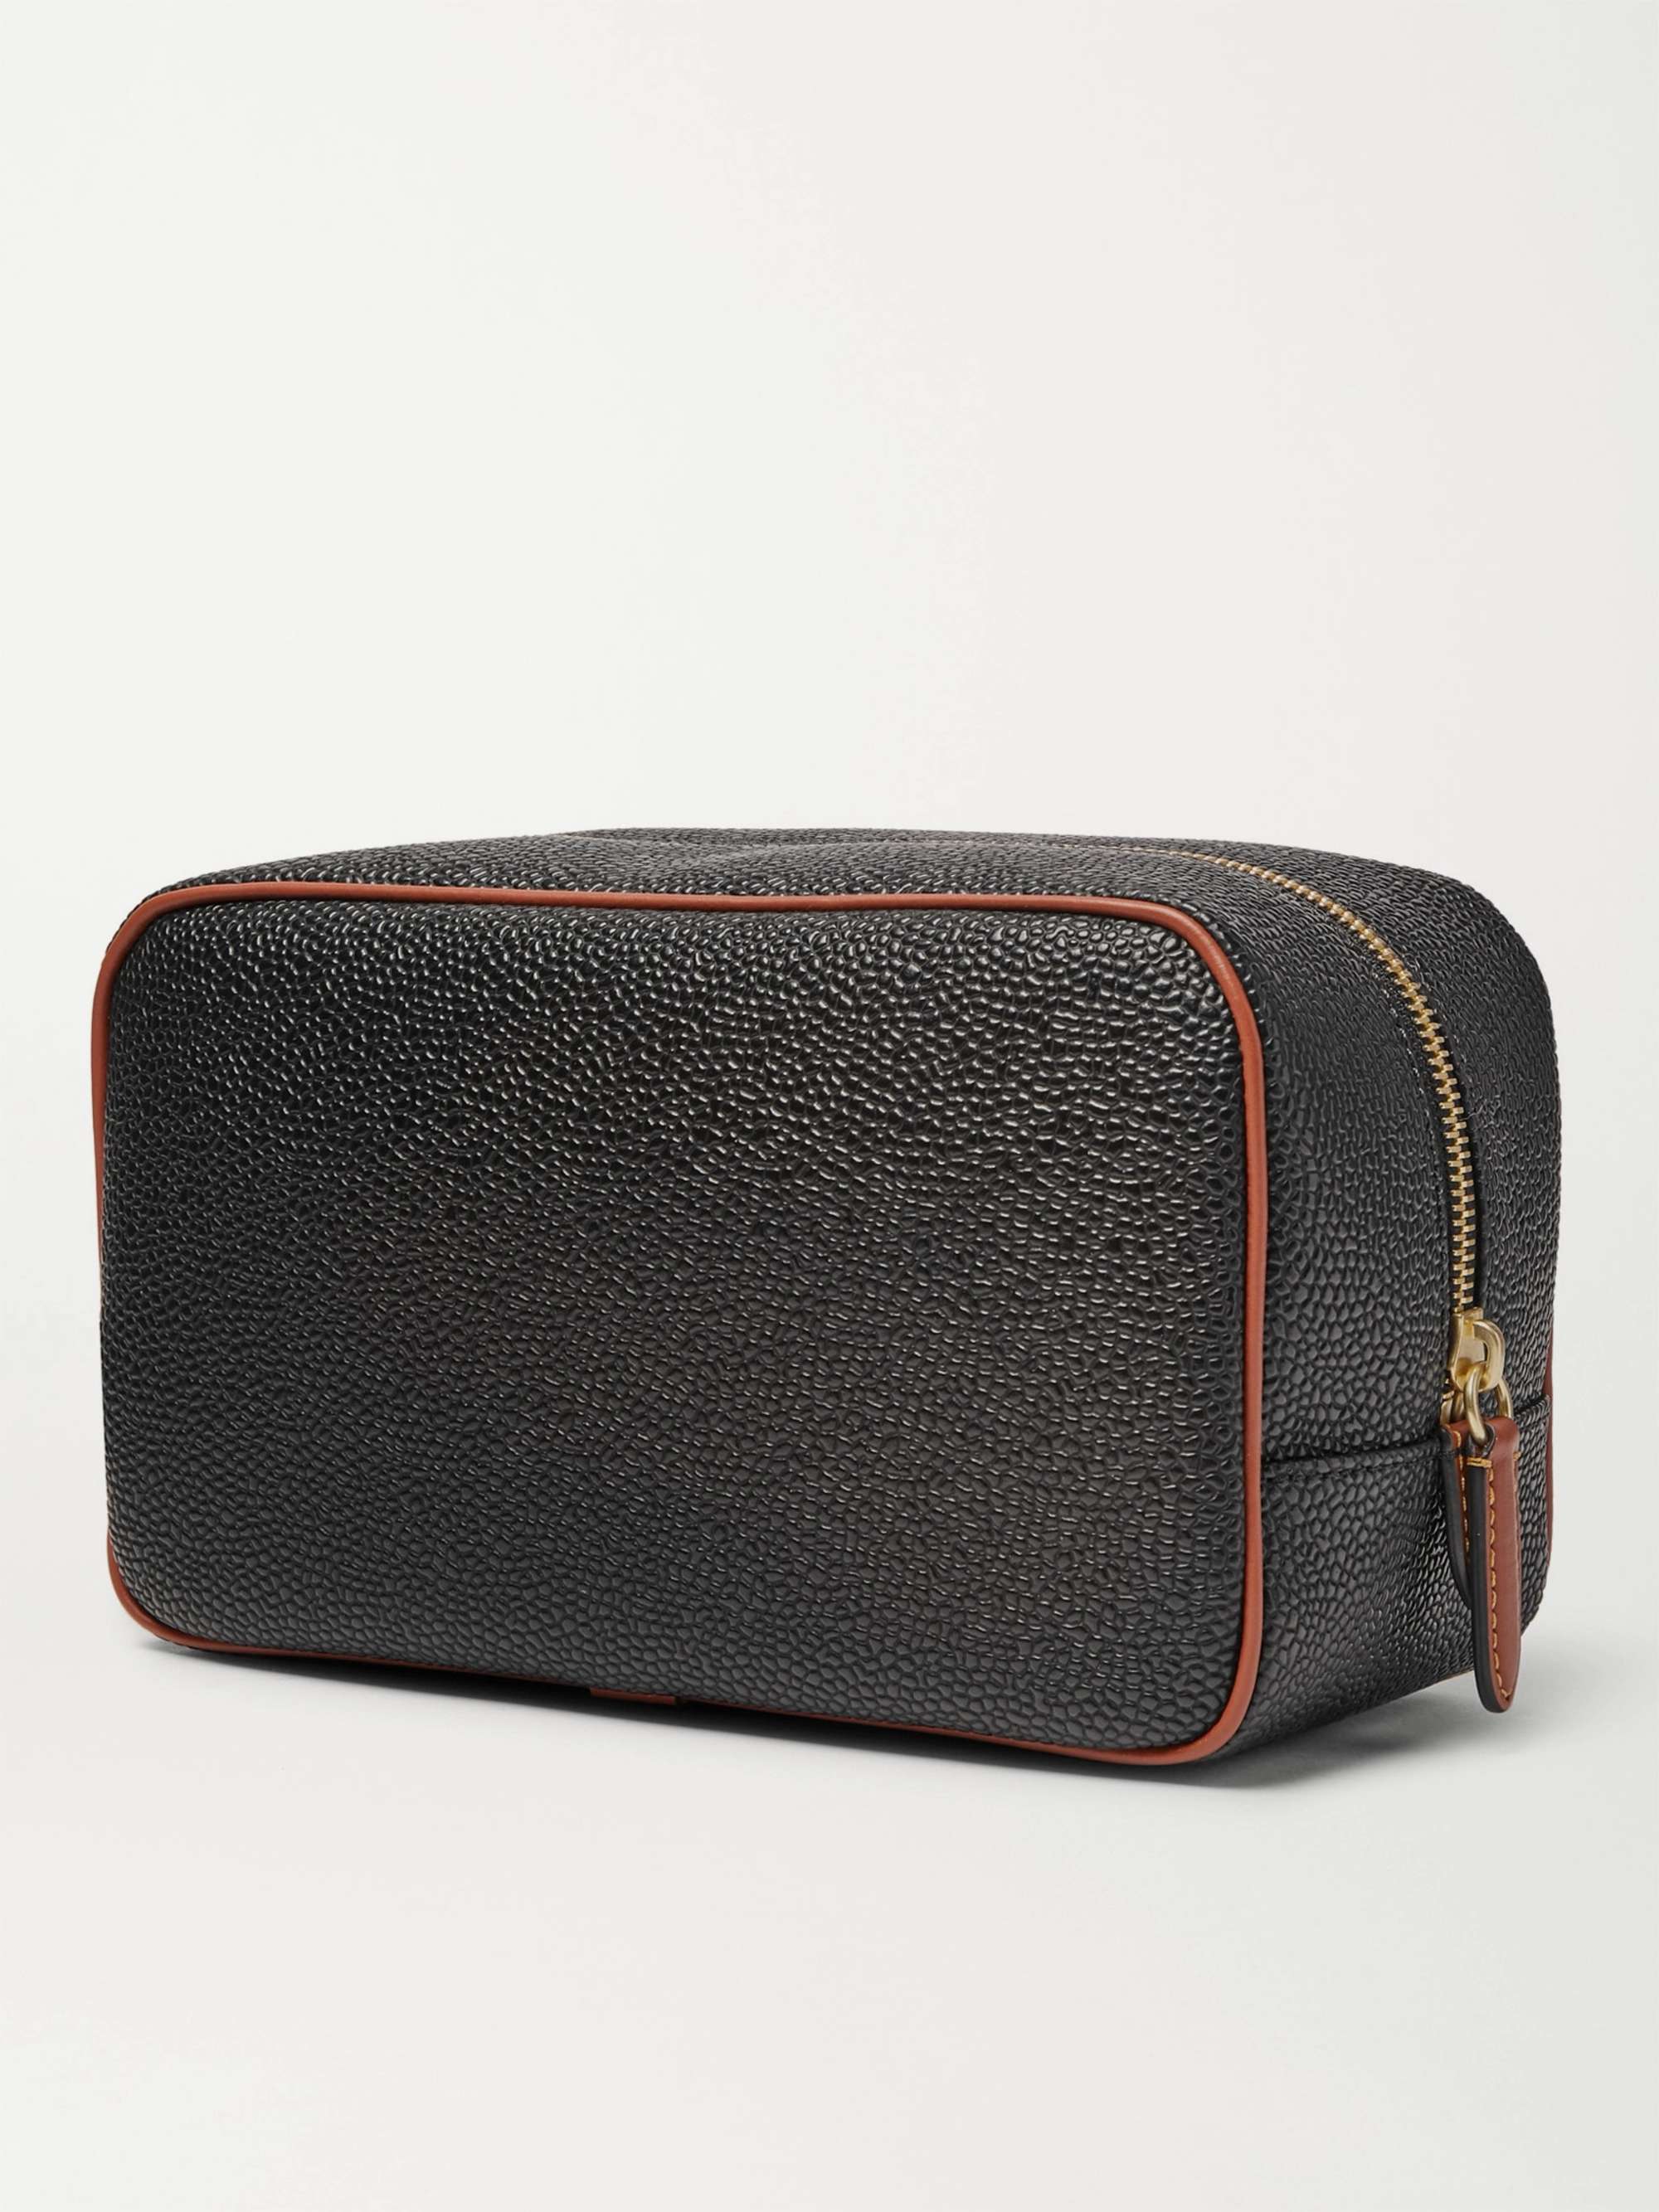 MULBERRY Leather-Trimmed Scotchgrain Wash Bag